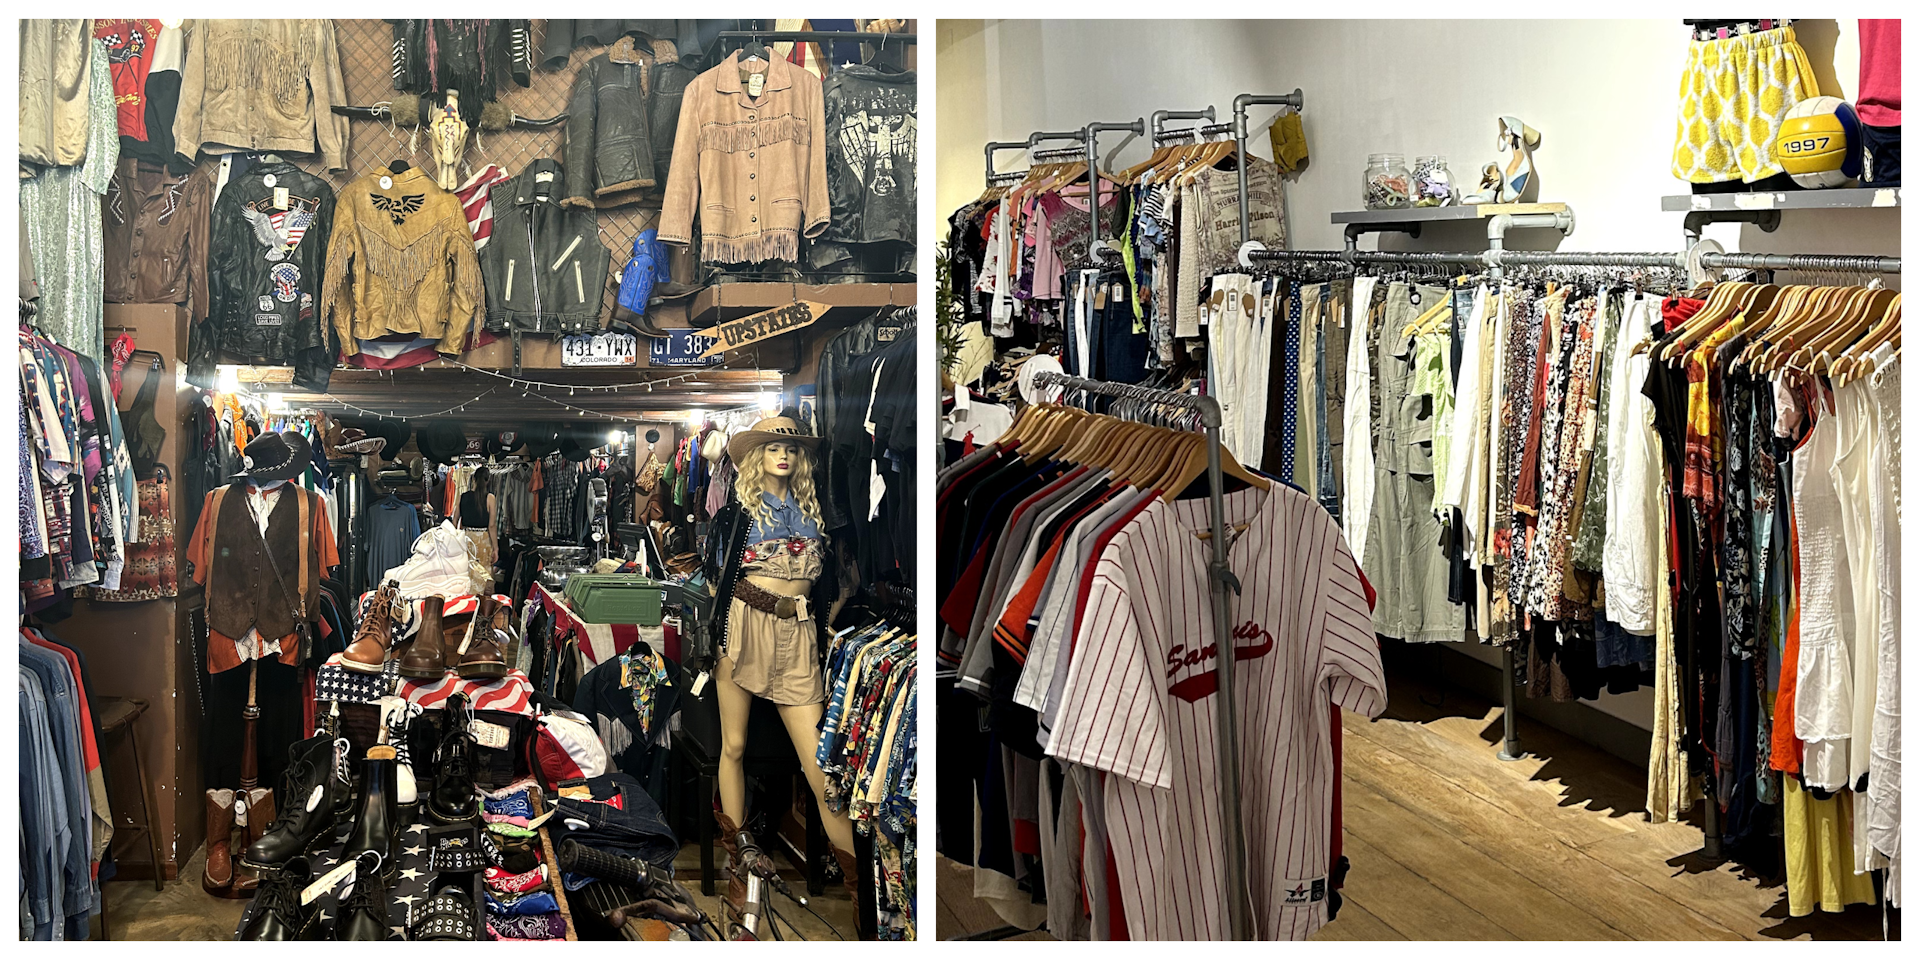 Vintage and Americana-style clothing in a Barcelona store